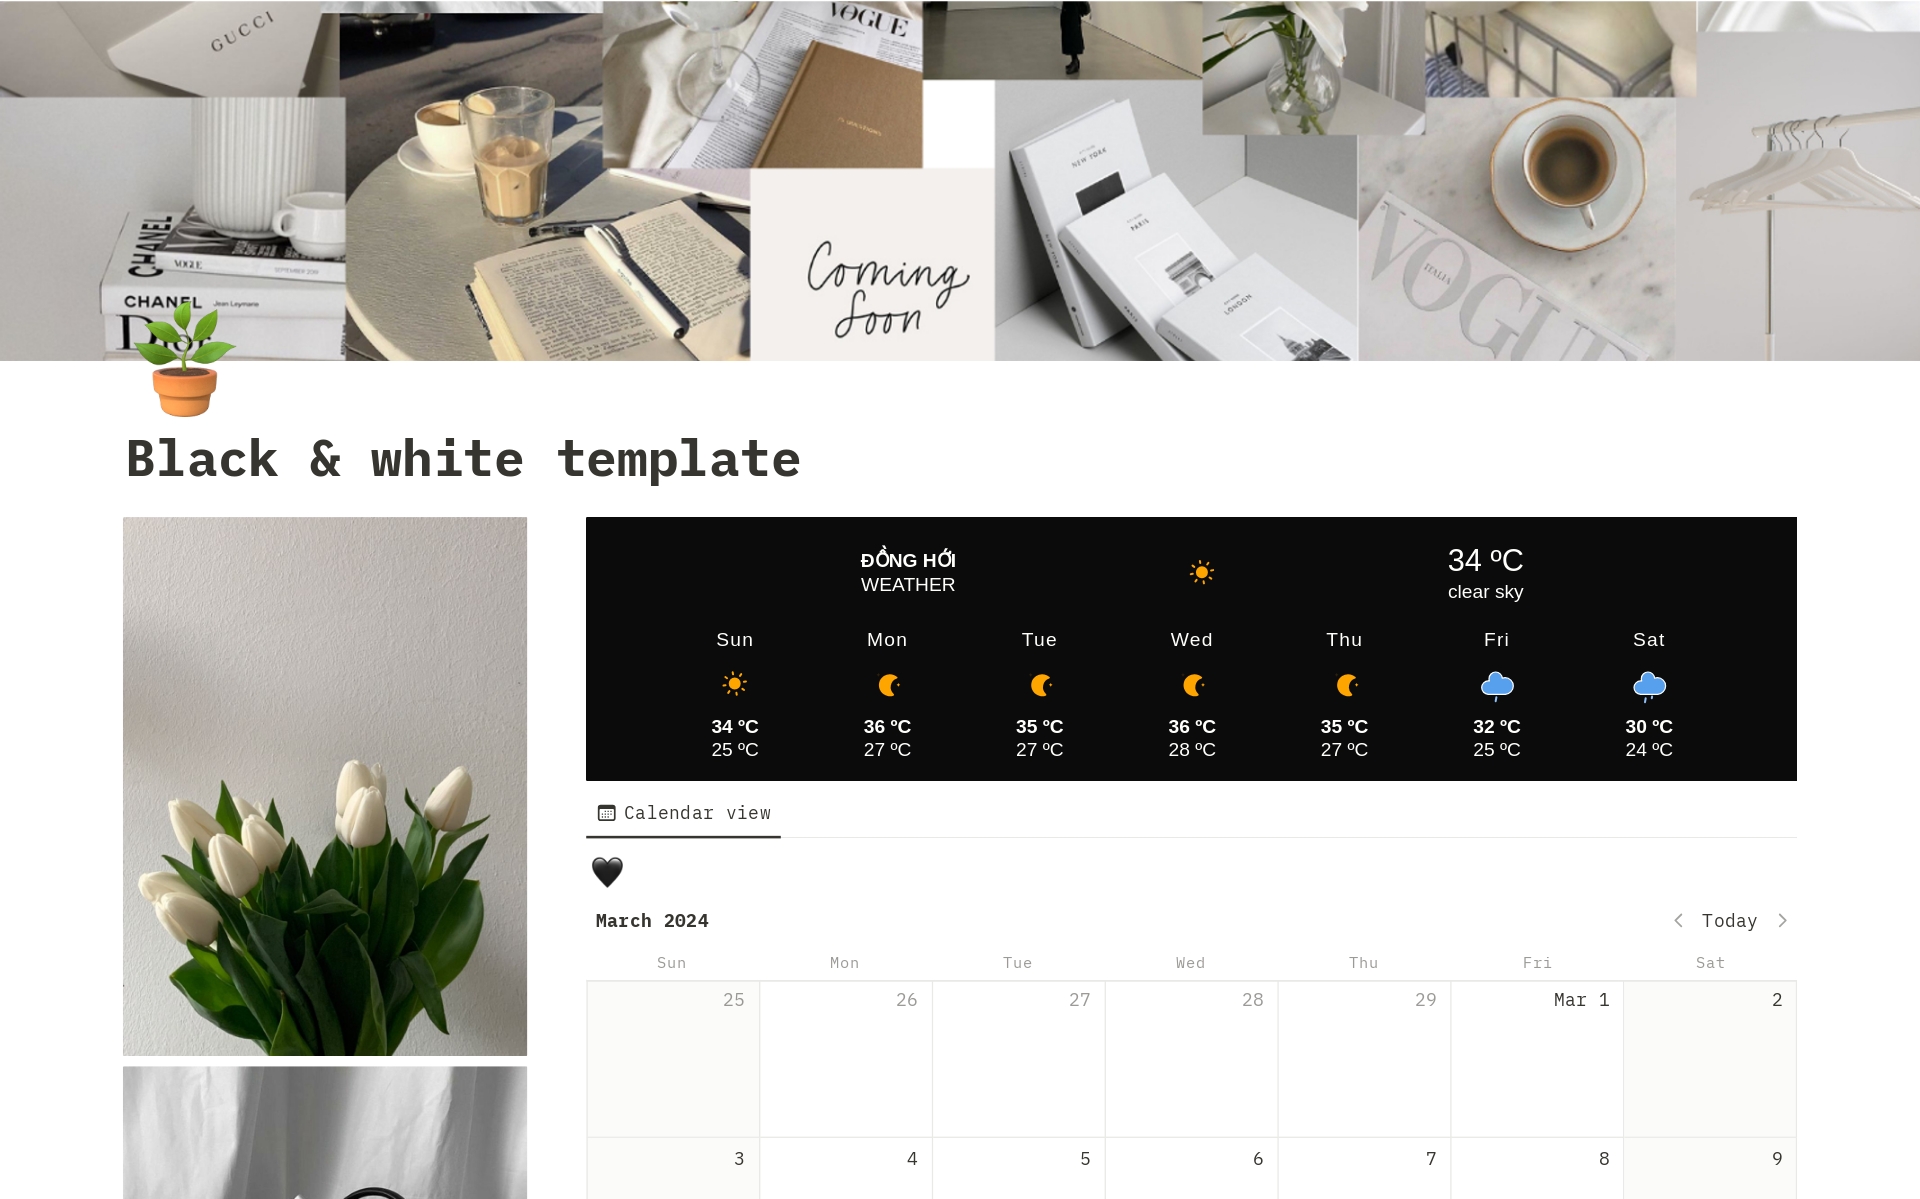 A template preview for Black & white Home/Working space